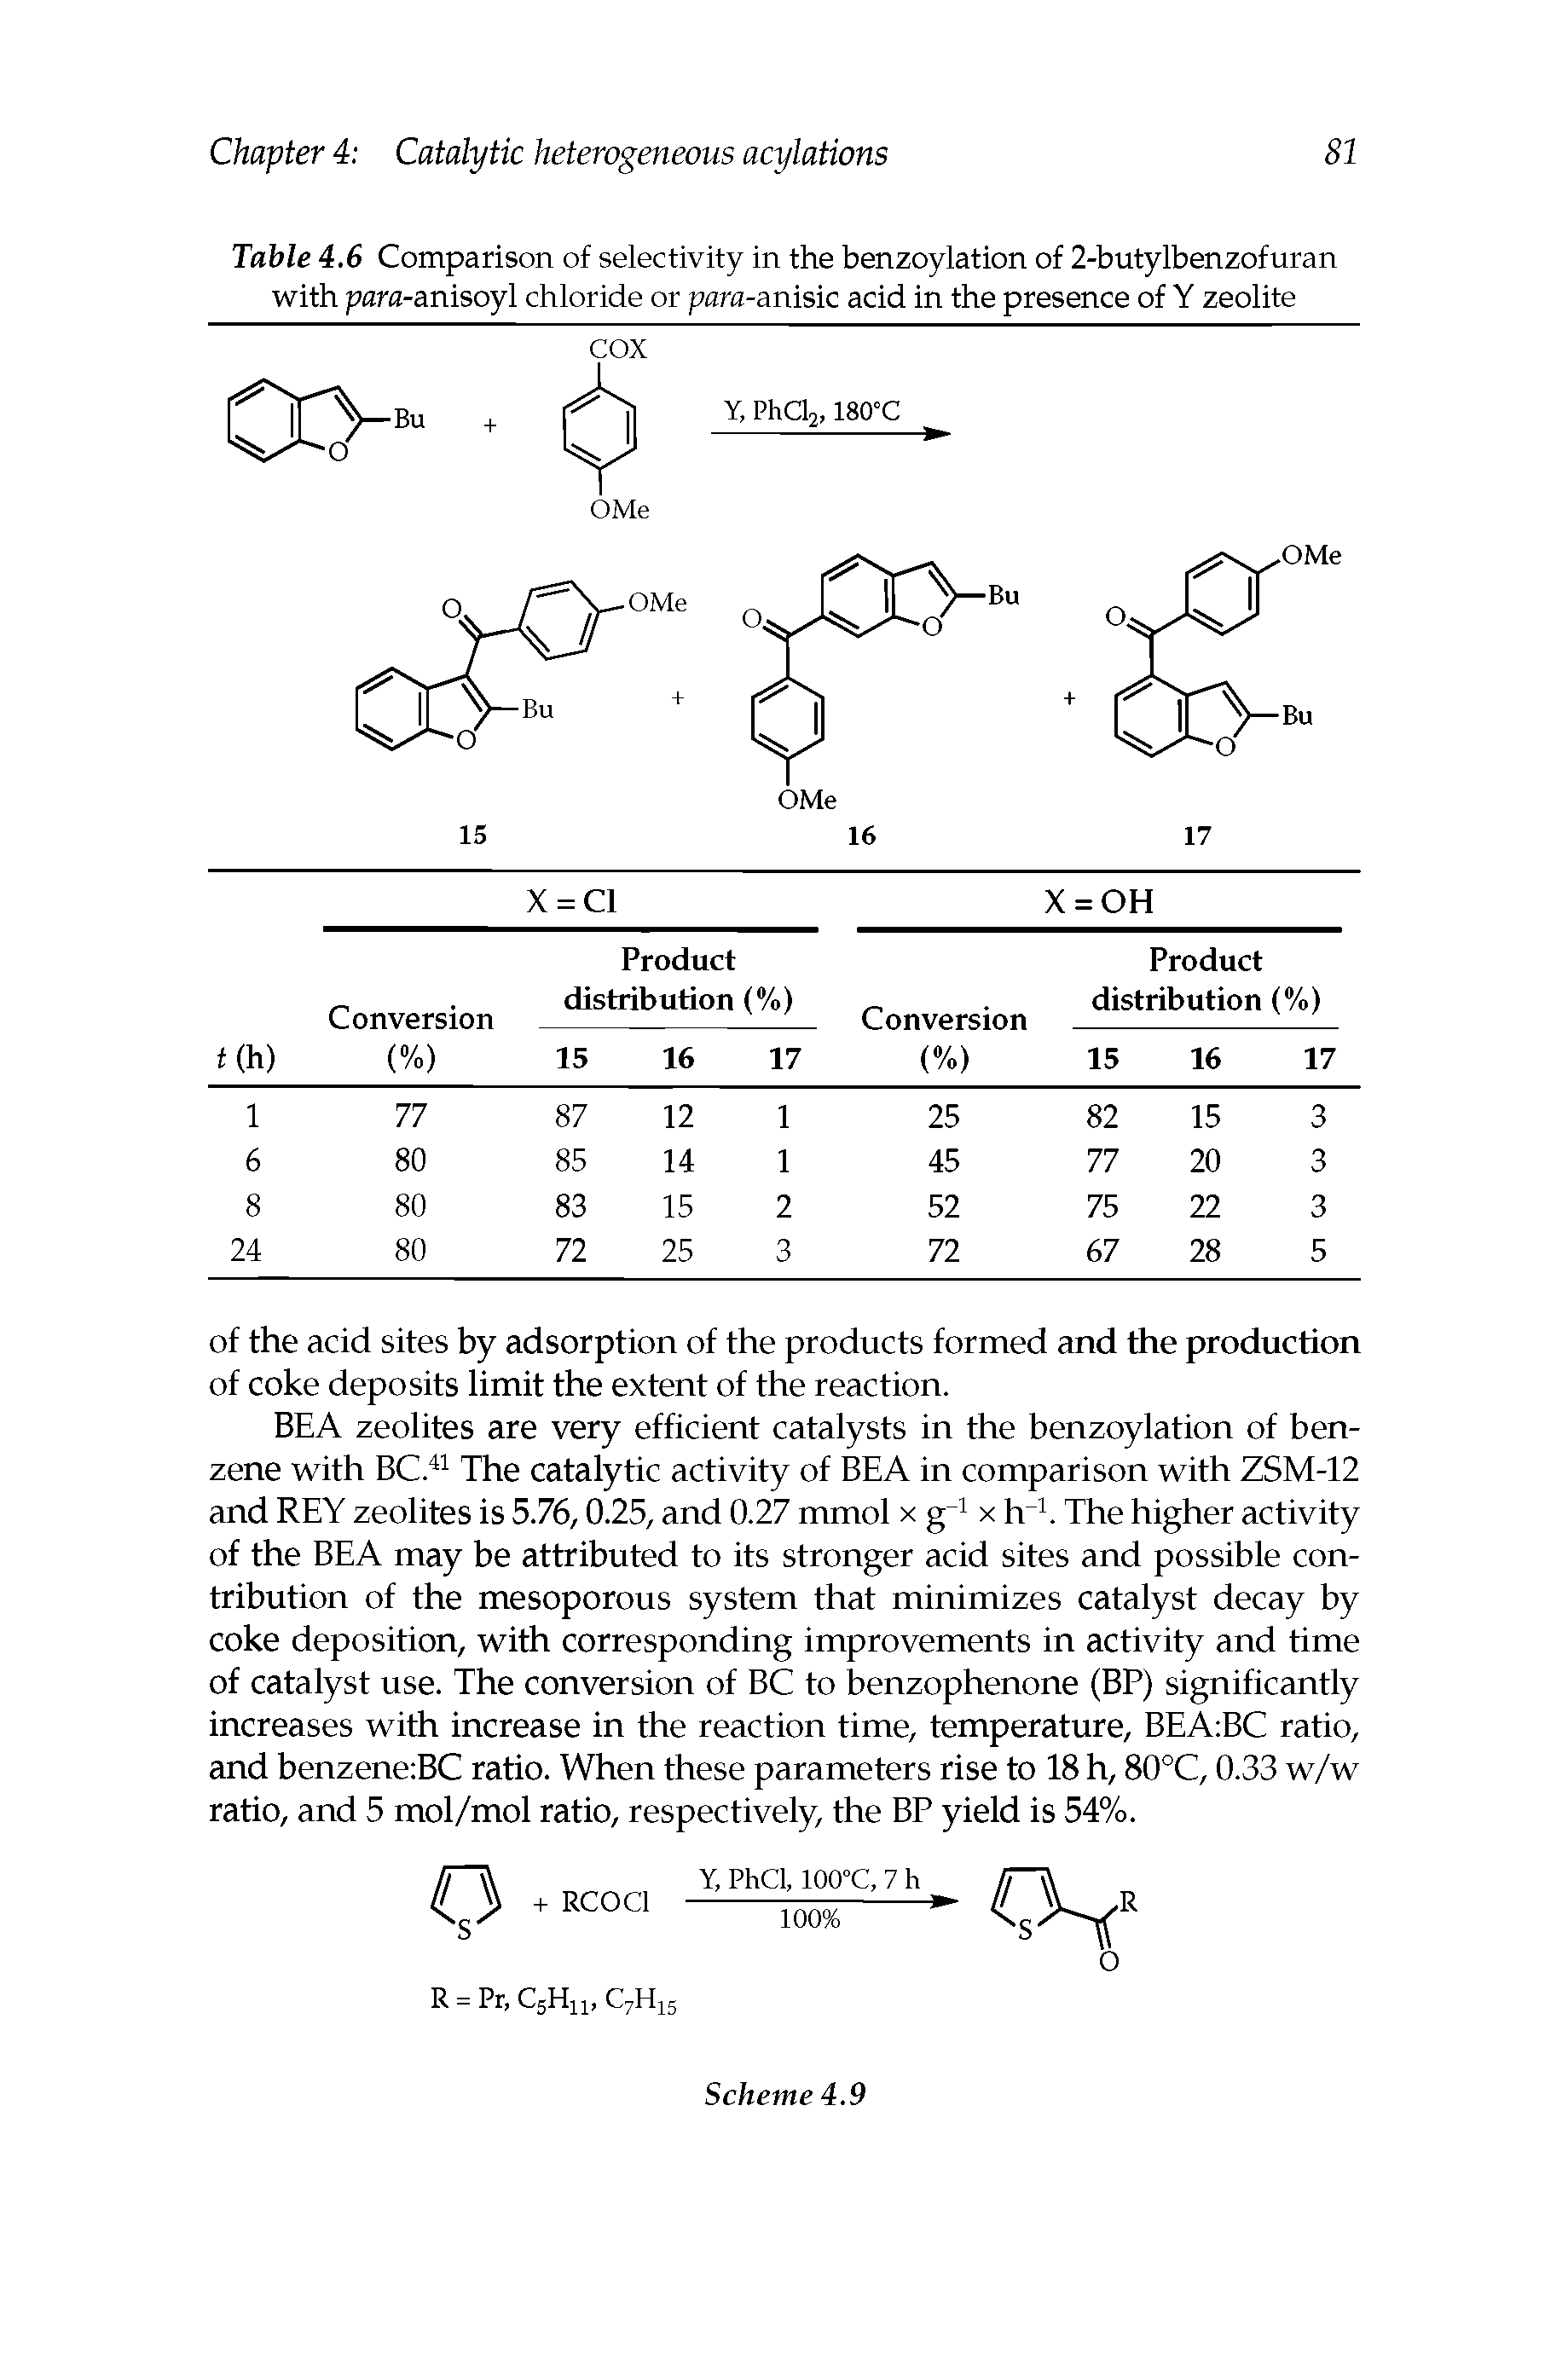 Table 4.6 Comparison of selectivity in the benzoylation of 2-butylbenzofuran with parfl-anisoyl chloride or para-anisic acid in the presence of Y zeolite...